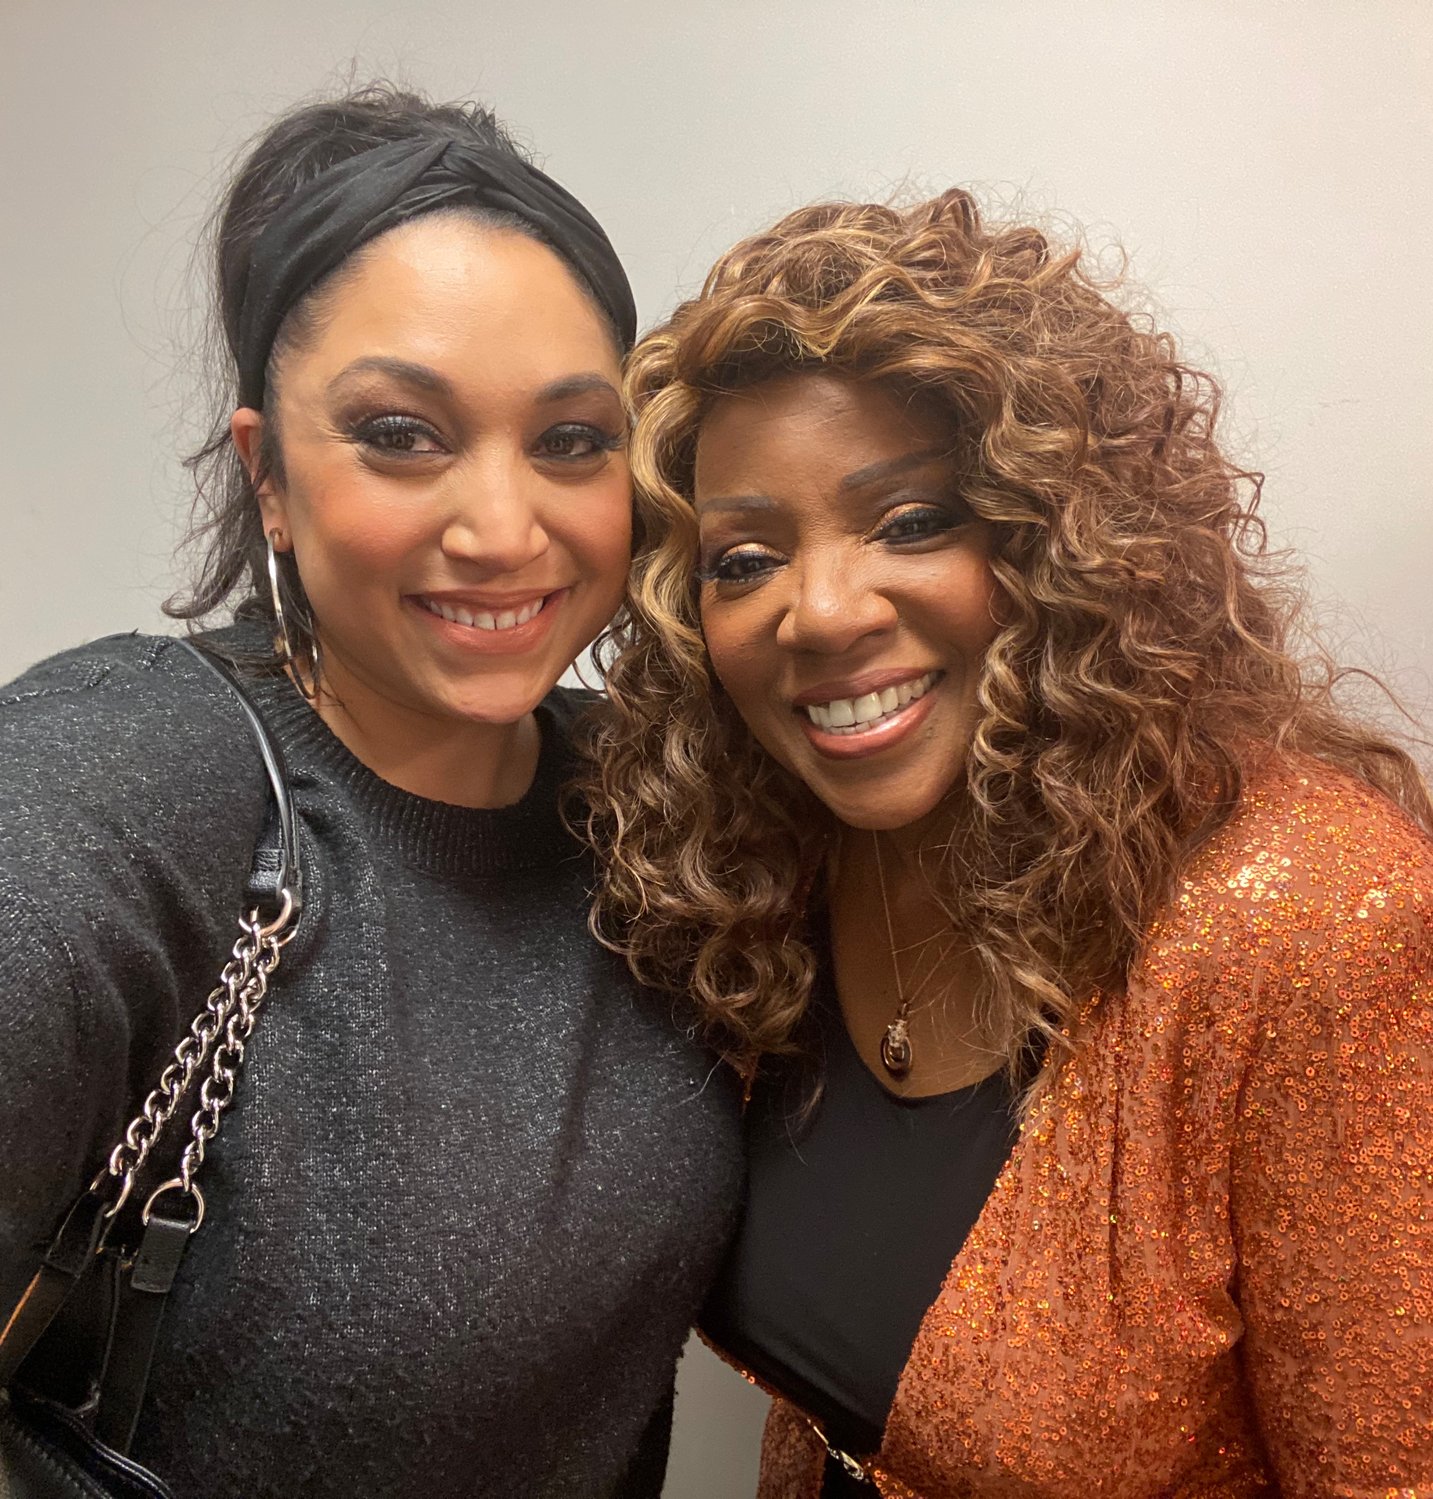 Ana Salvemini, left, is a background vocalist for the “I Will Survive” singer Gloria Gaynor.